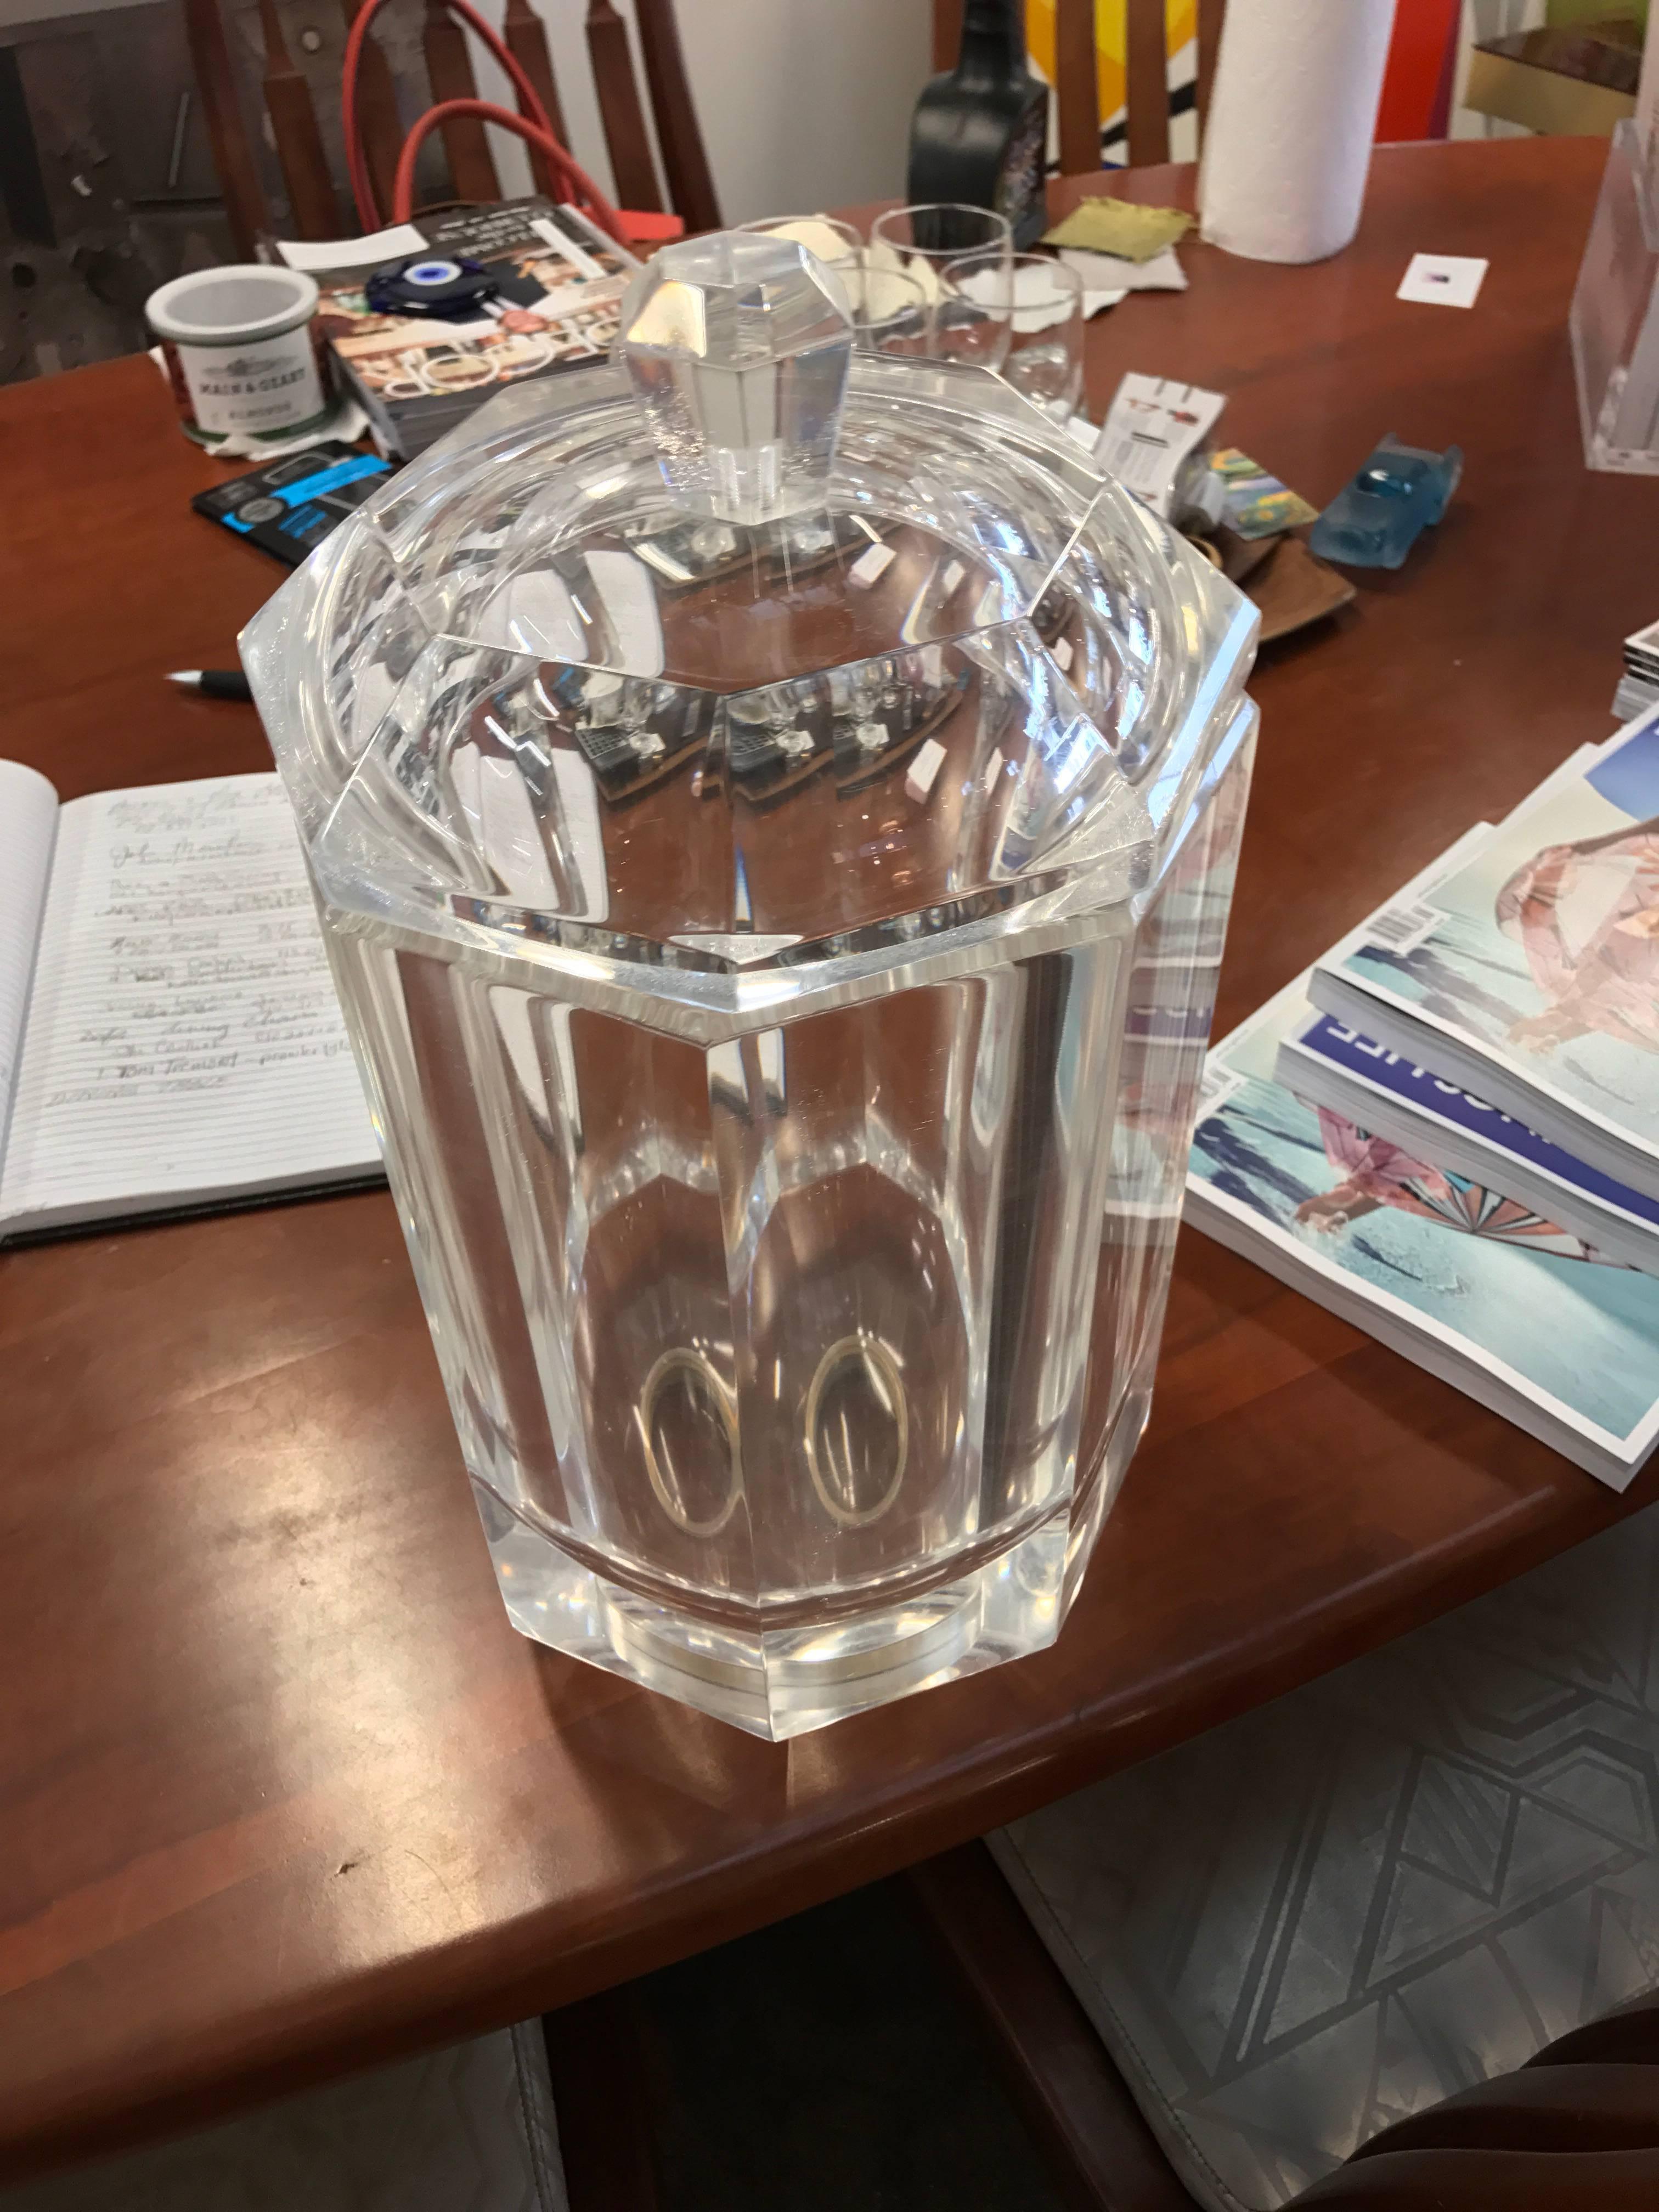 A vintage Lucite wine cooler or ice bucket with its original top. The top unscrews and can be used as an ice bucket or set on a table. The base is frosted. We have had it lightly polished although there is some age crazing and minor wear. Hard to